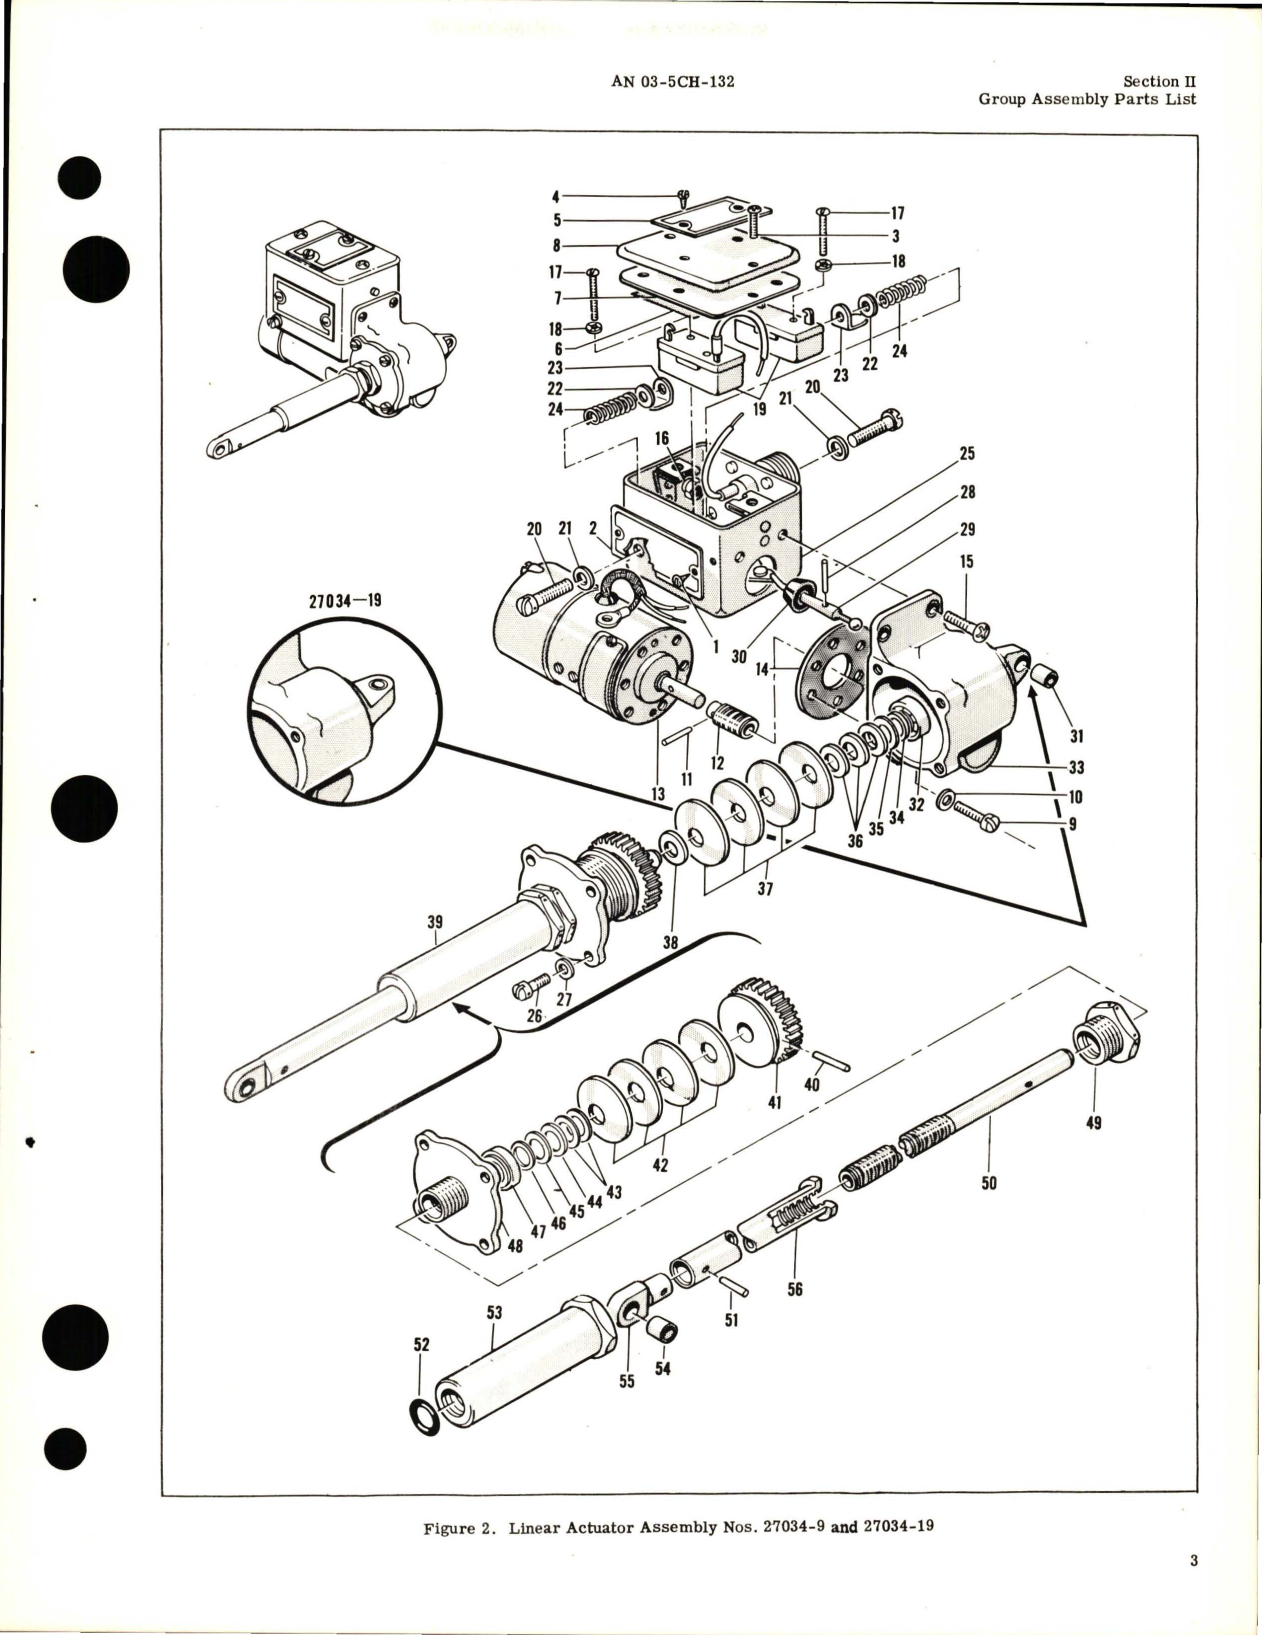 Sample page 7 from AirCorps Library document: Parts Catalog for Linear Load Limit Actuators